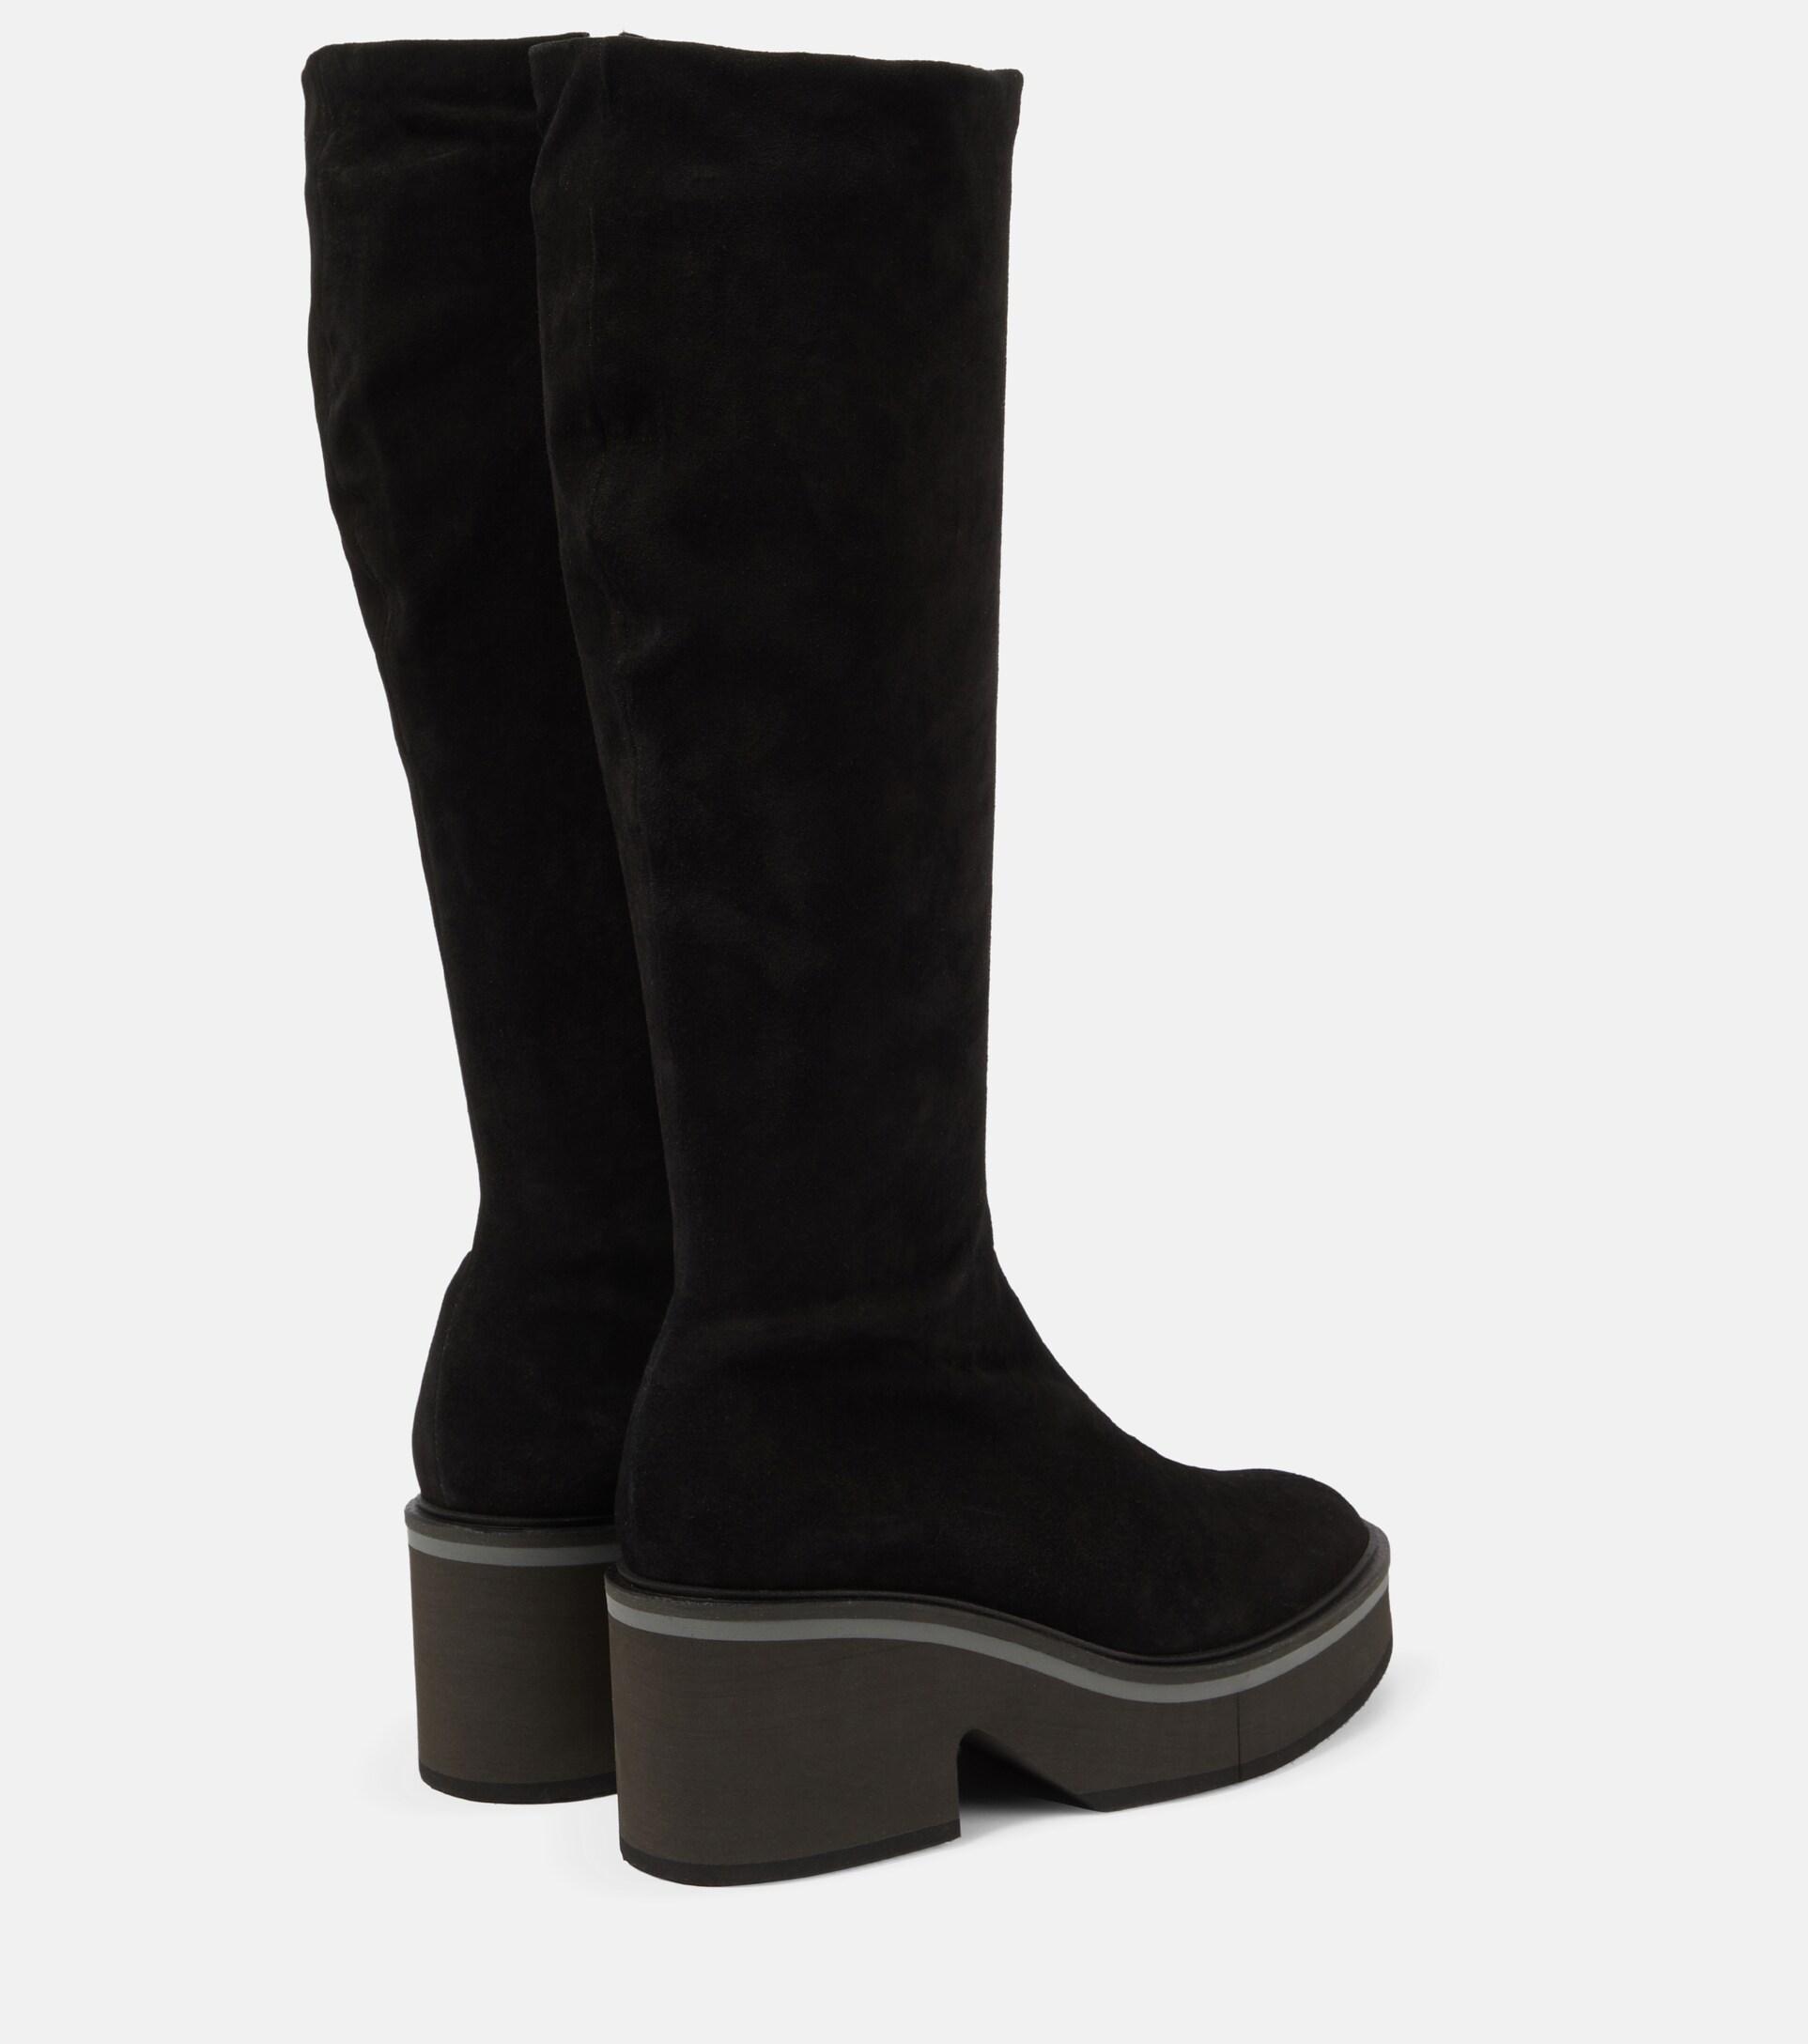 Robert Clergerie Anki Suede Knee-high Boots in Black | Lyst